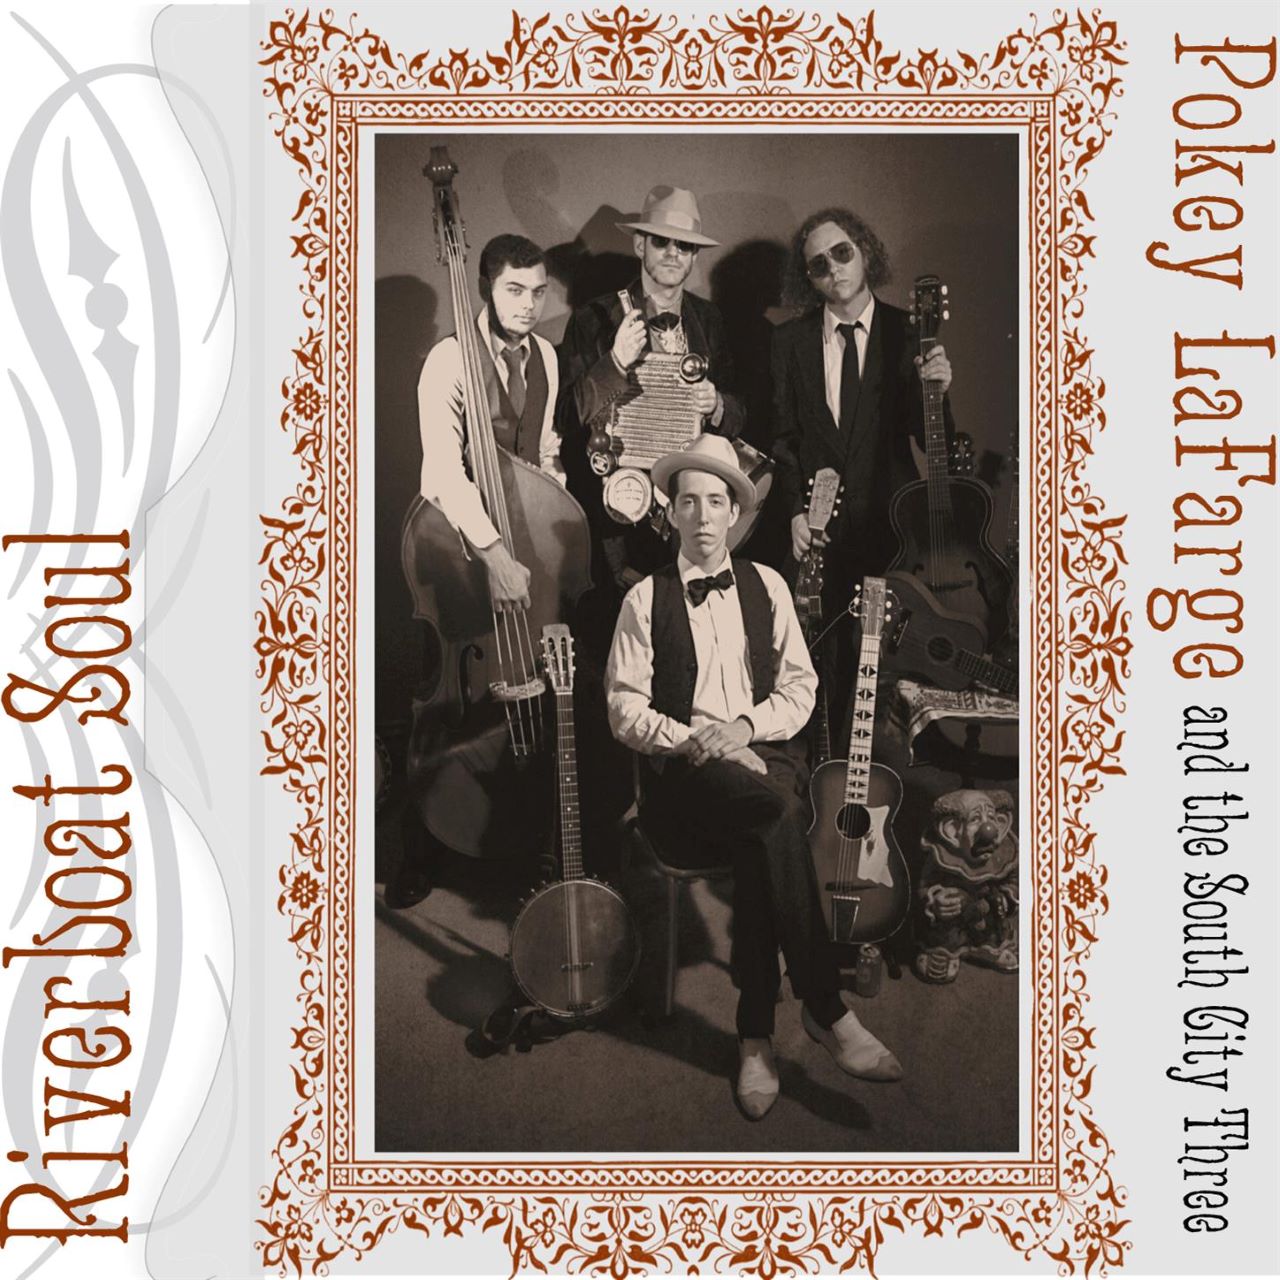 Pokey LaFarge & The South City Three - Riverboat Soul cover album